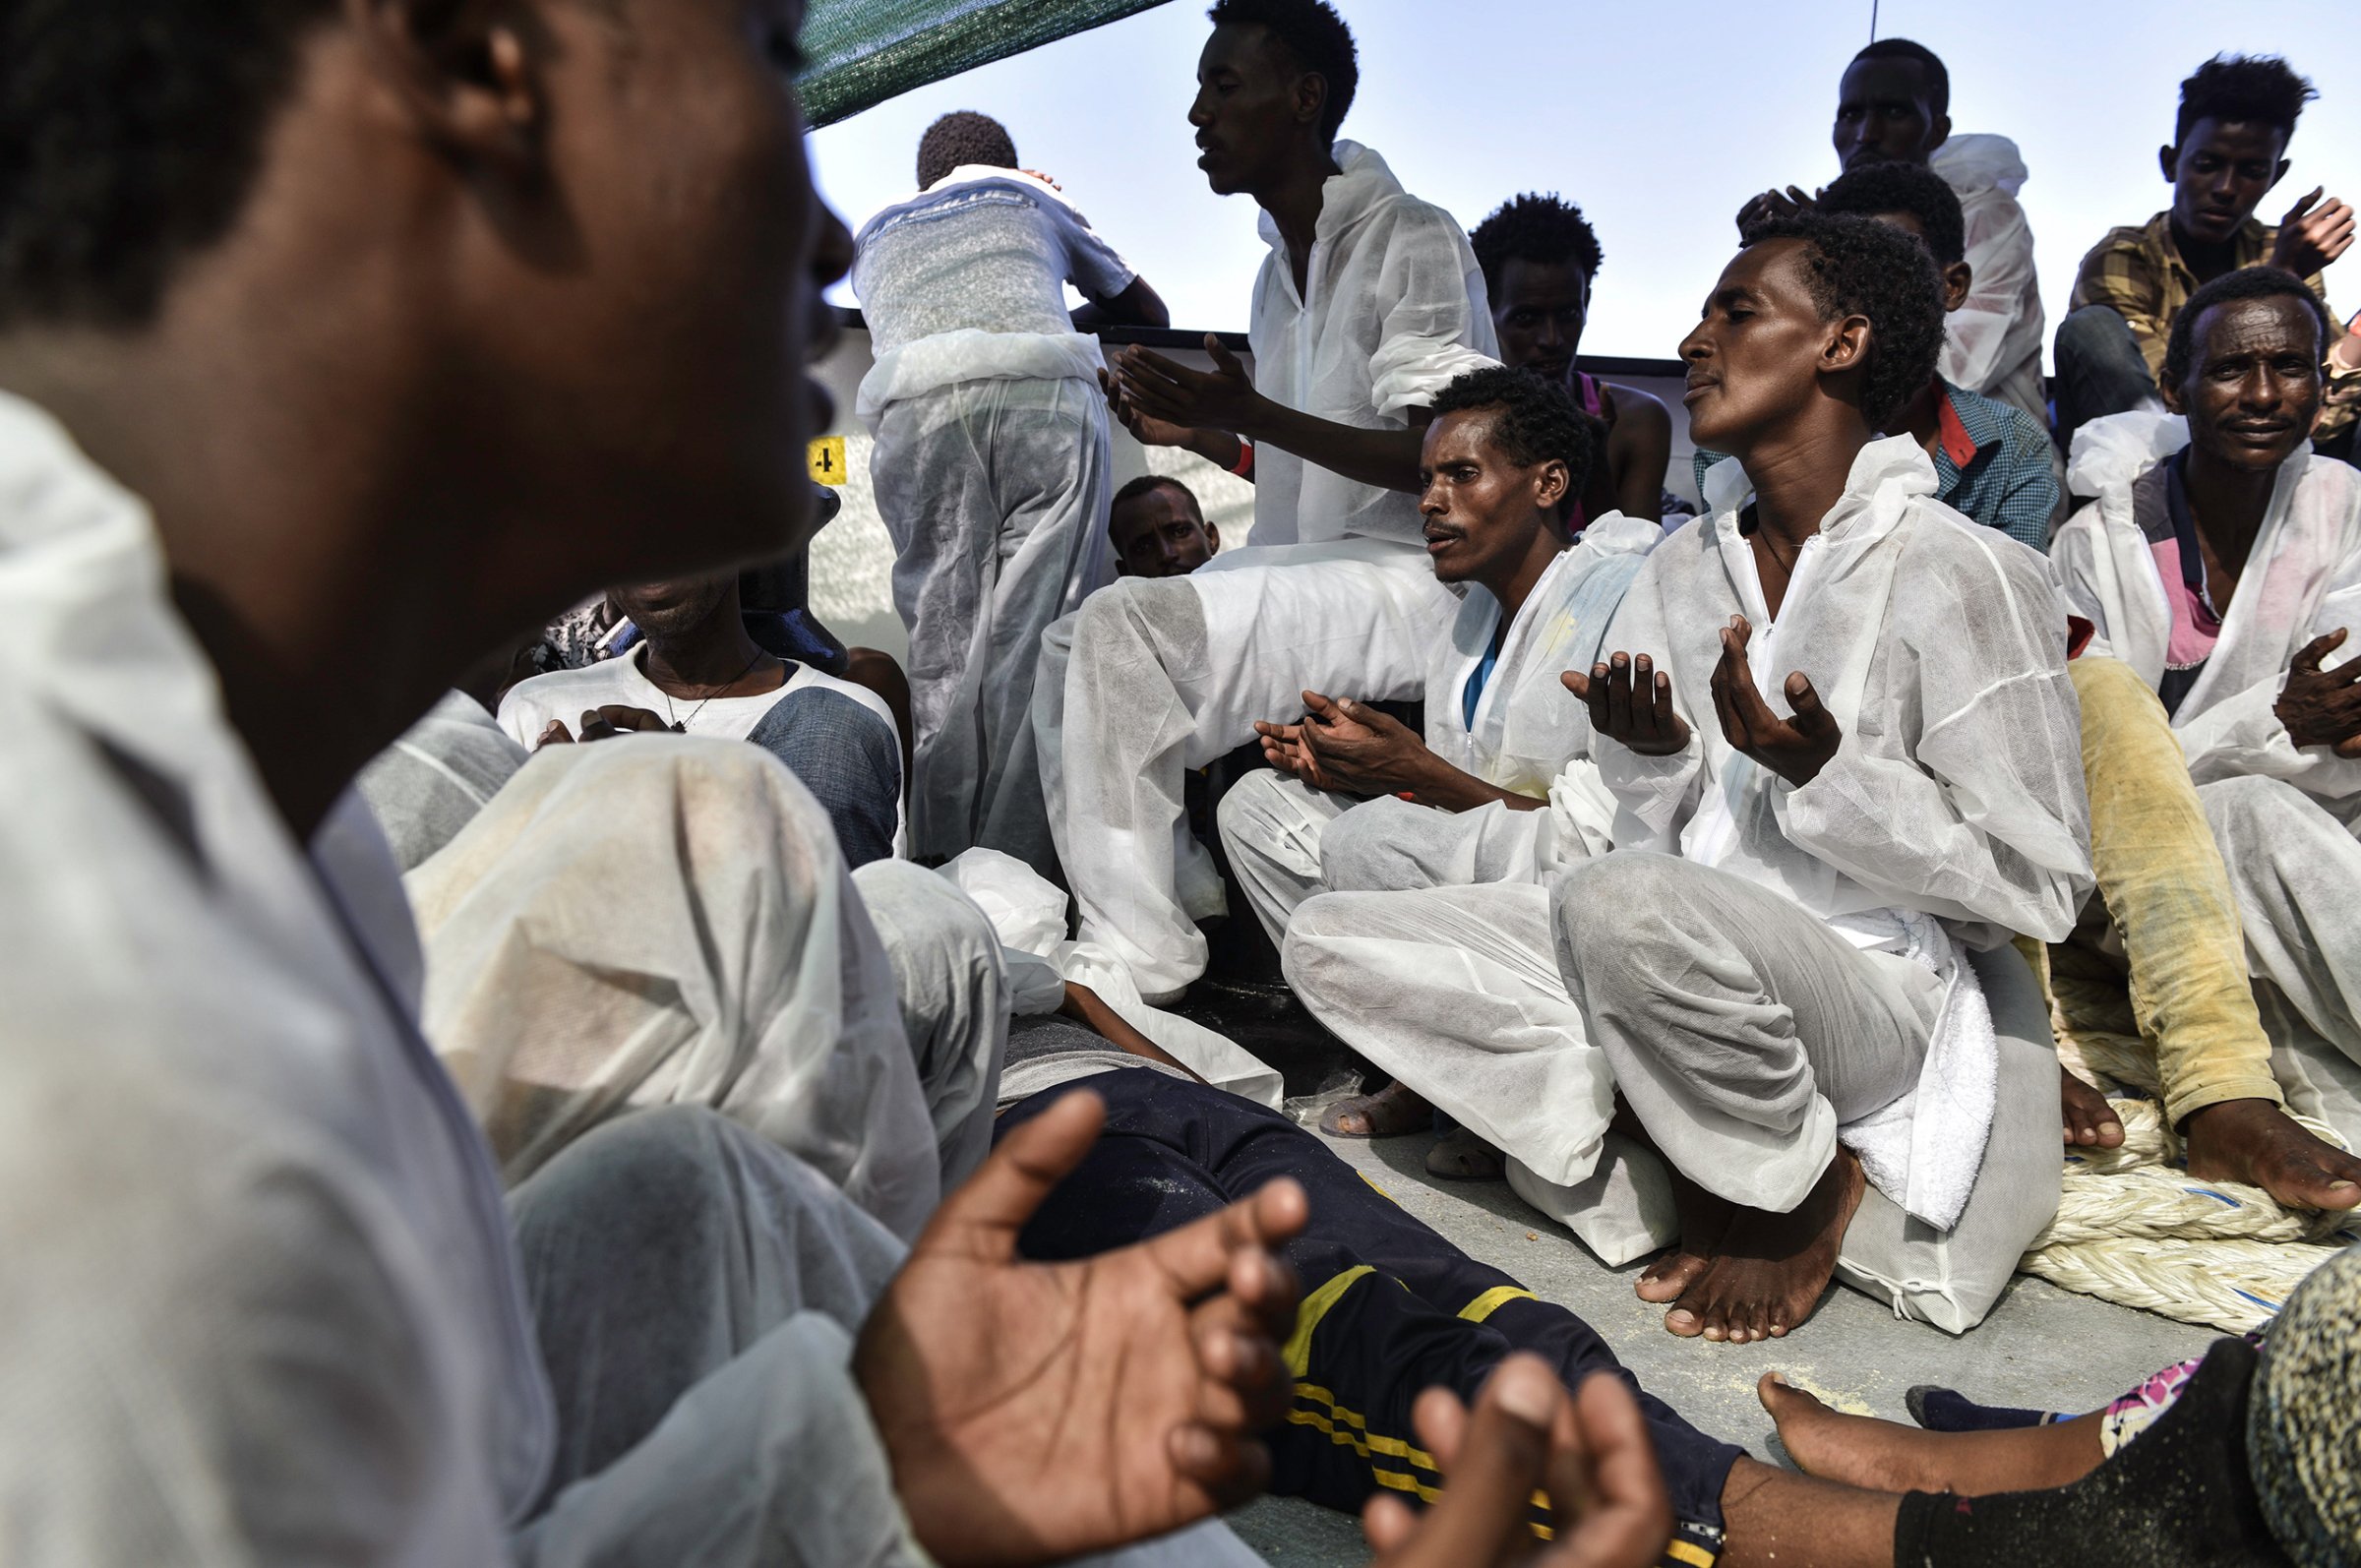 Eritrean Orthodox Christian men sing and pray after their rescue, Aug. 21, 2016.